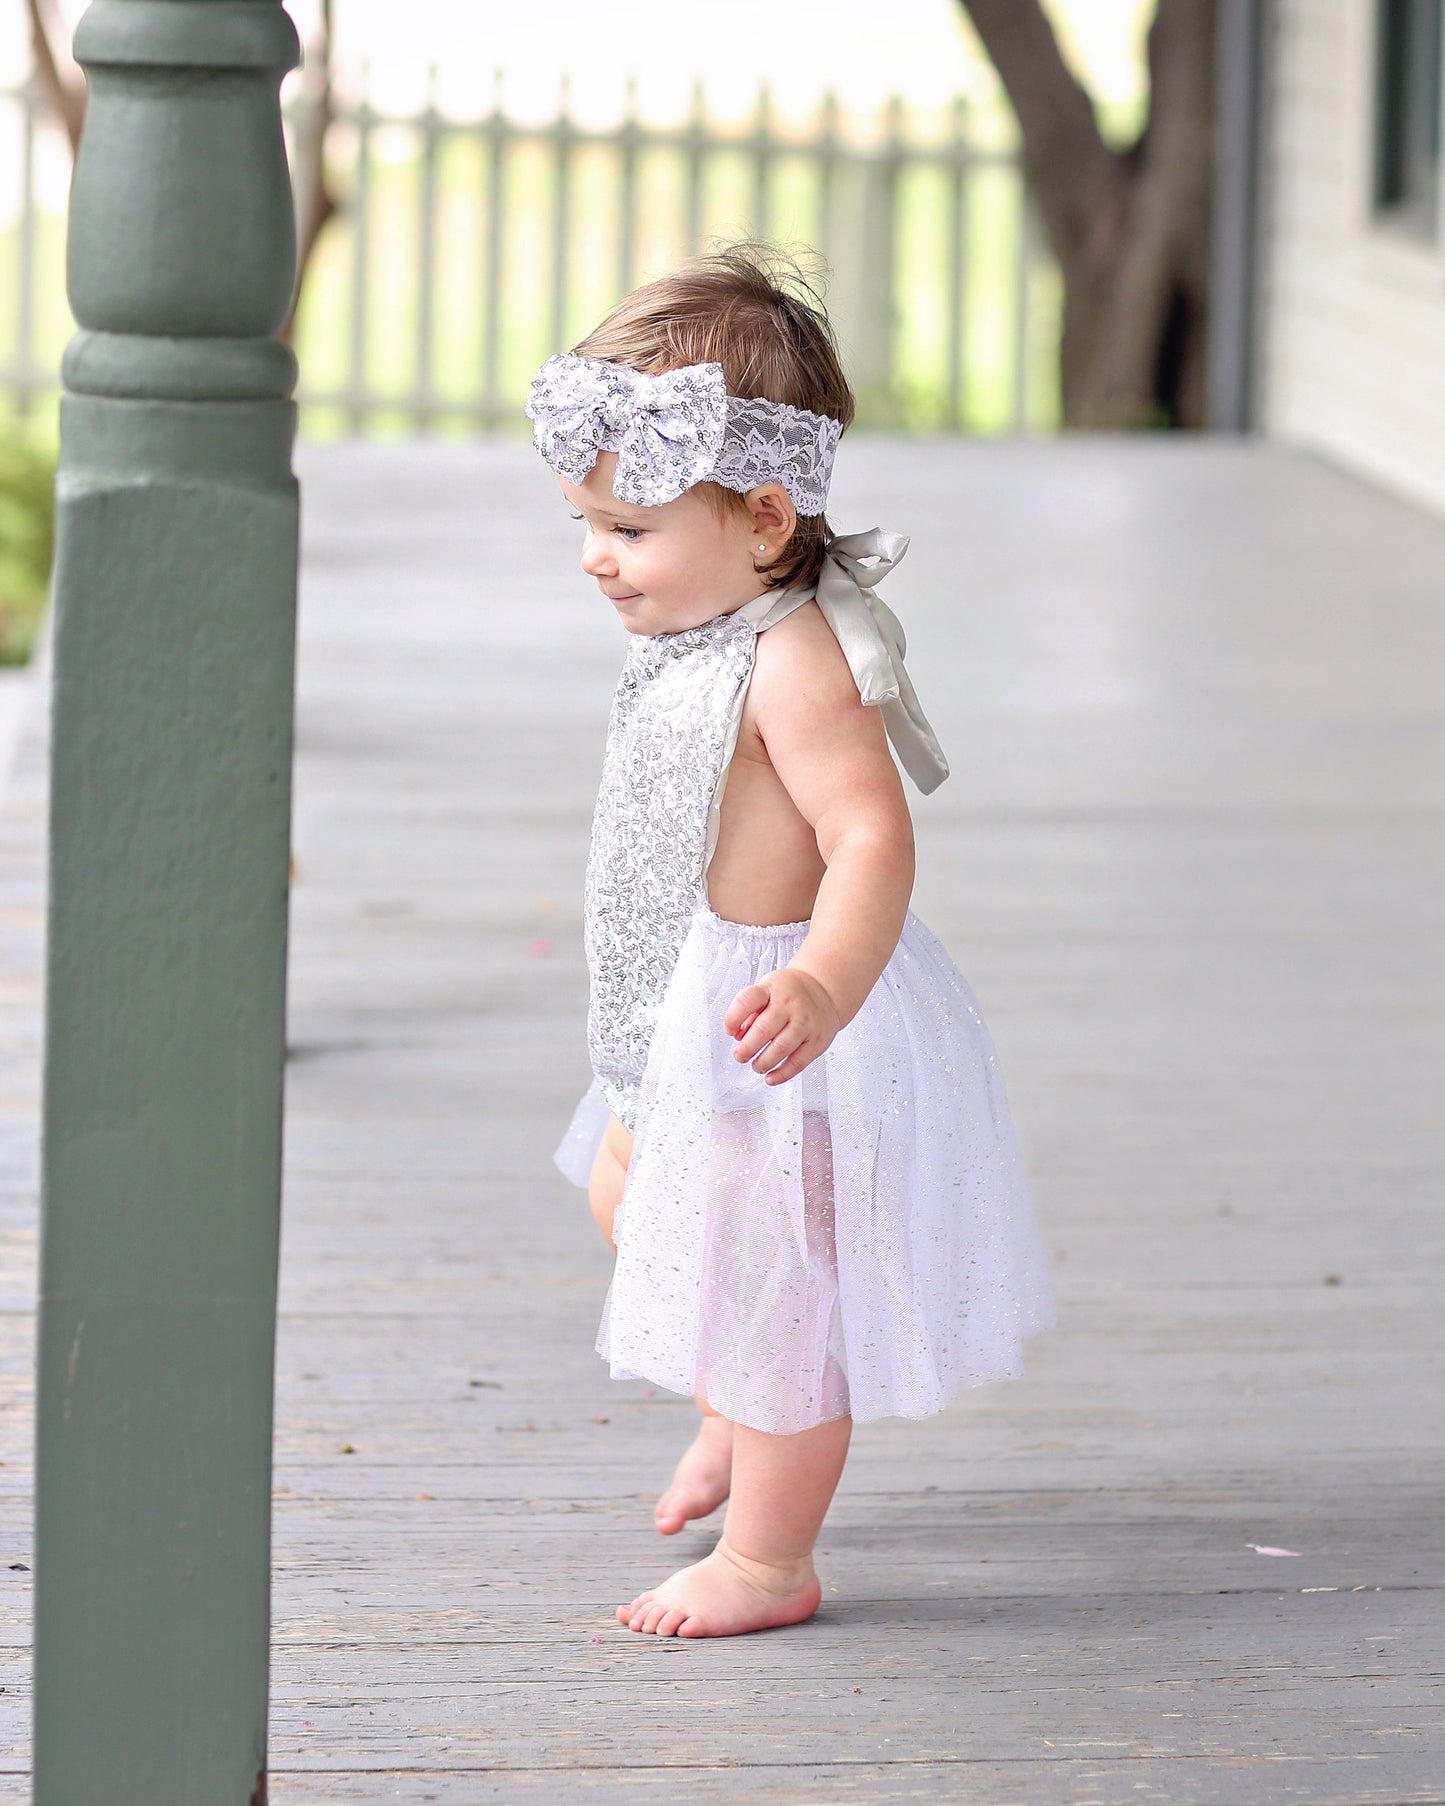 Silver Sequin Skirted Romper 0-6 months - Tulle skirt, romper - Sequin Romper, Birthday Romper - birthday, baby photo shoot, birthday outfit